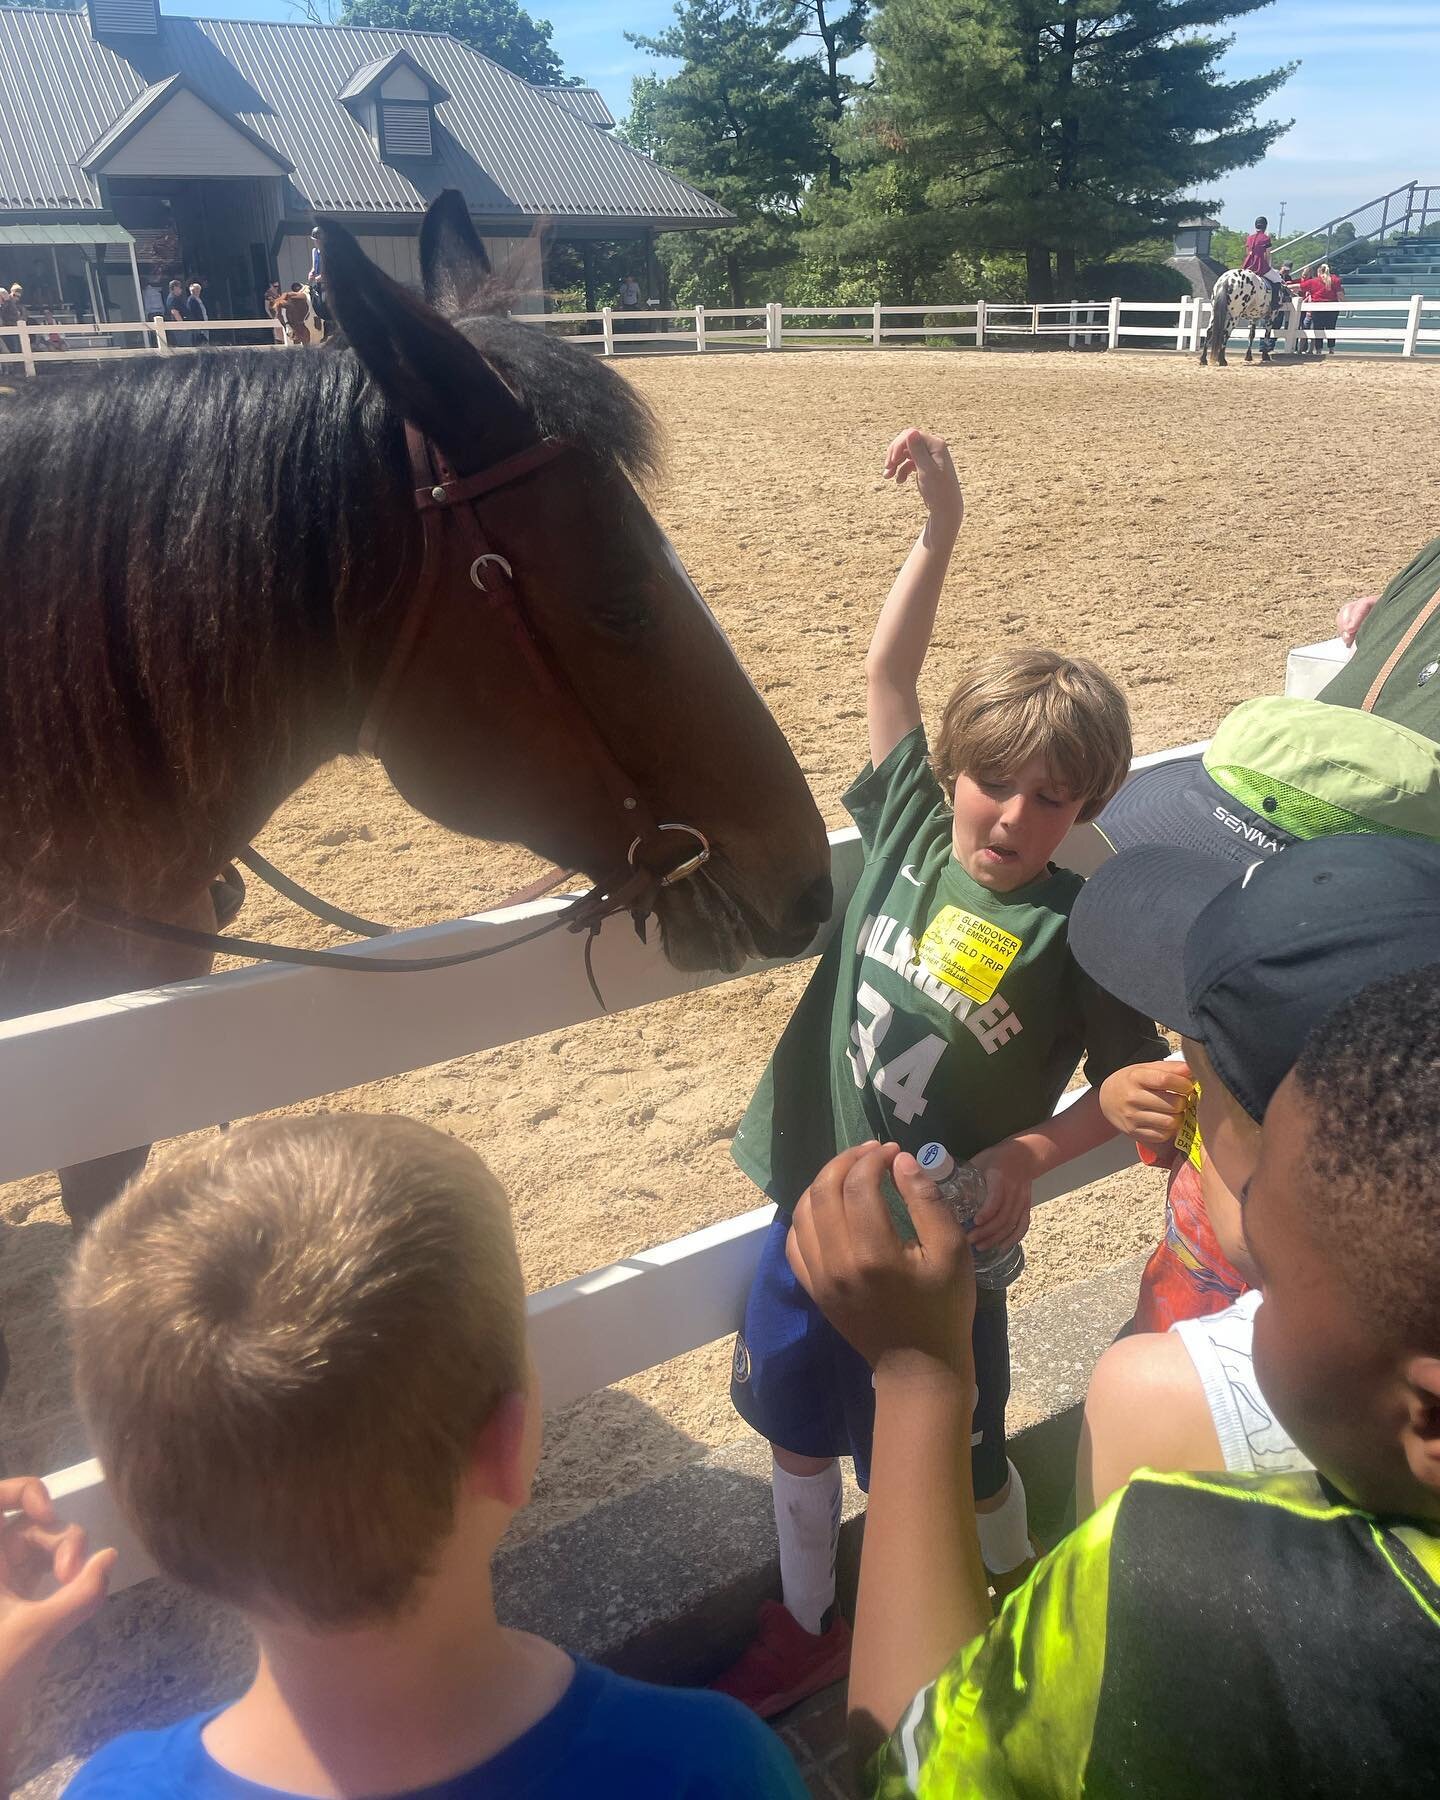 A lot of the time, my off time is spent with my son and helping at his fantastic school. 

Today we went to the @kyhorsepark and had a fun day in the sun! Being around the kiddos always gives me new purpose. 

❤️🧡💚💜💙💛🩷